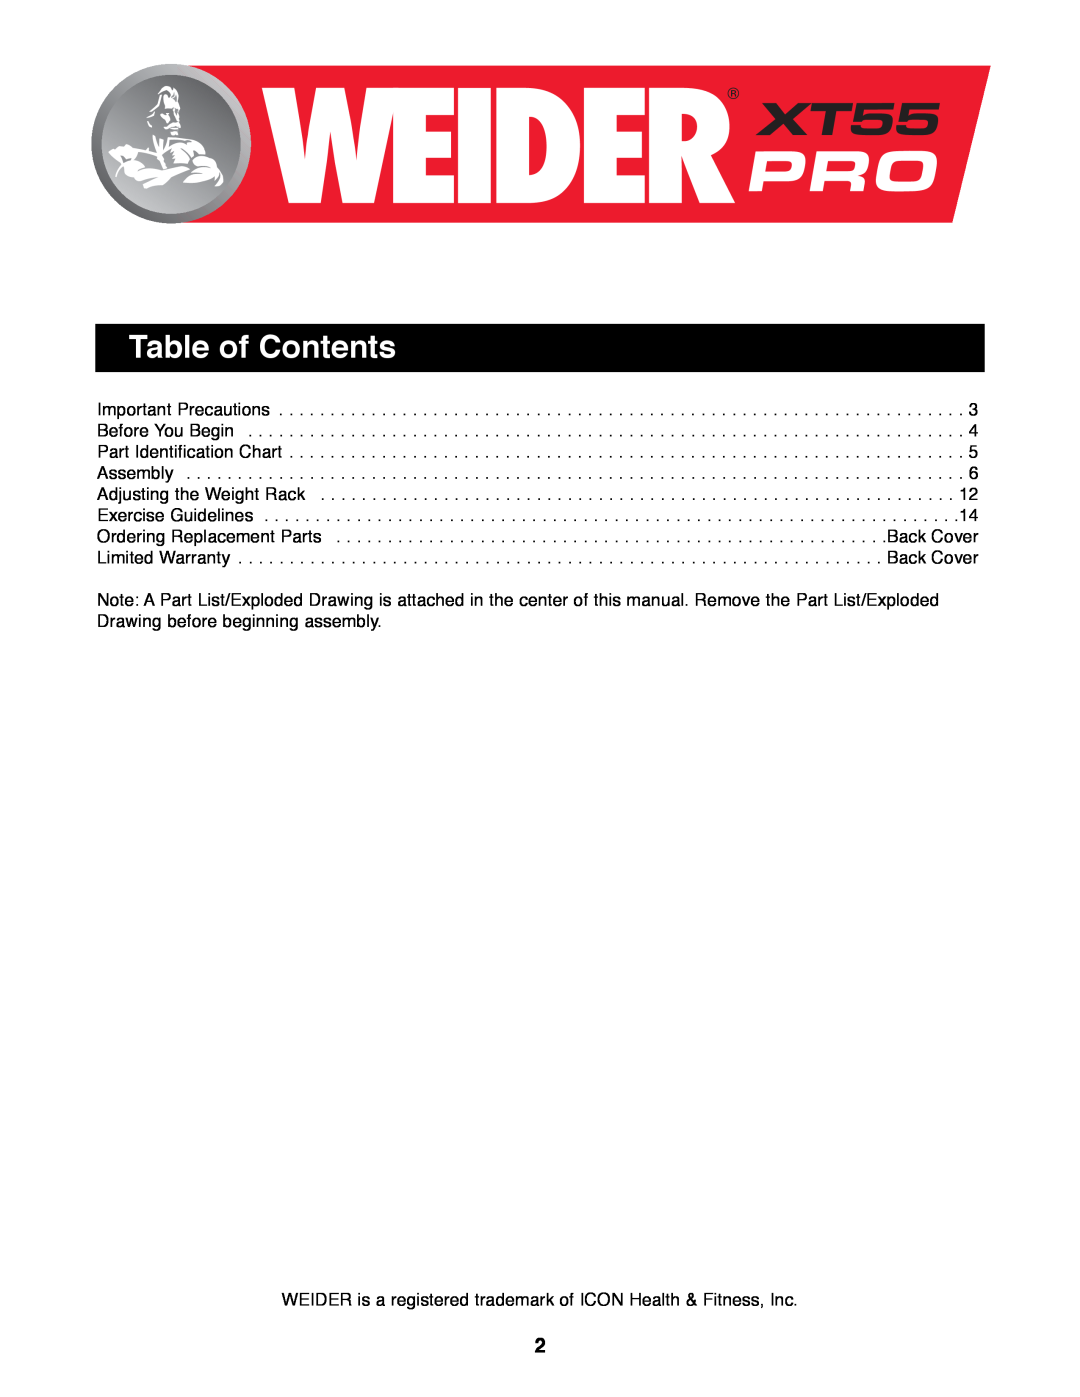 Weider WEBE19300 manual Table of Contents 